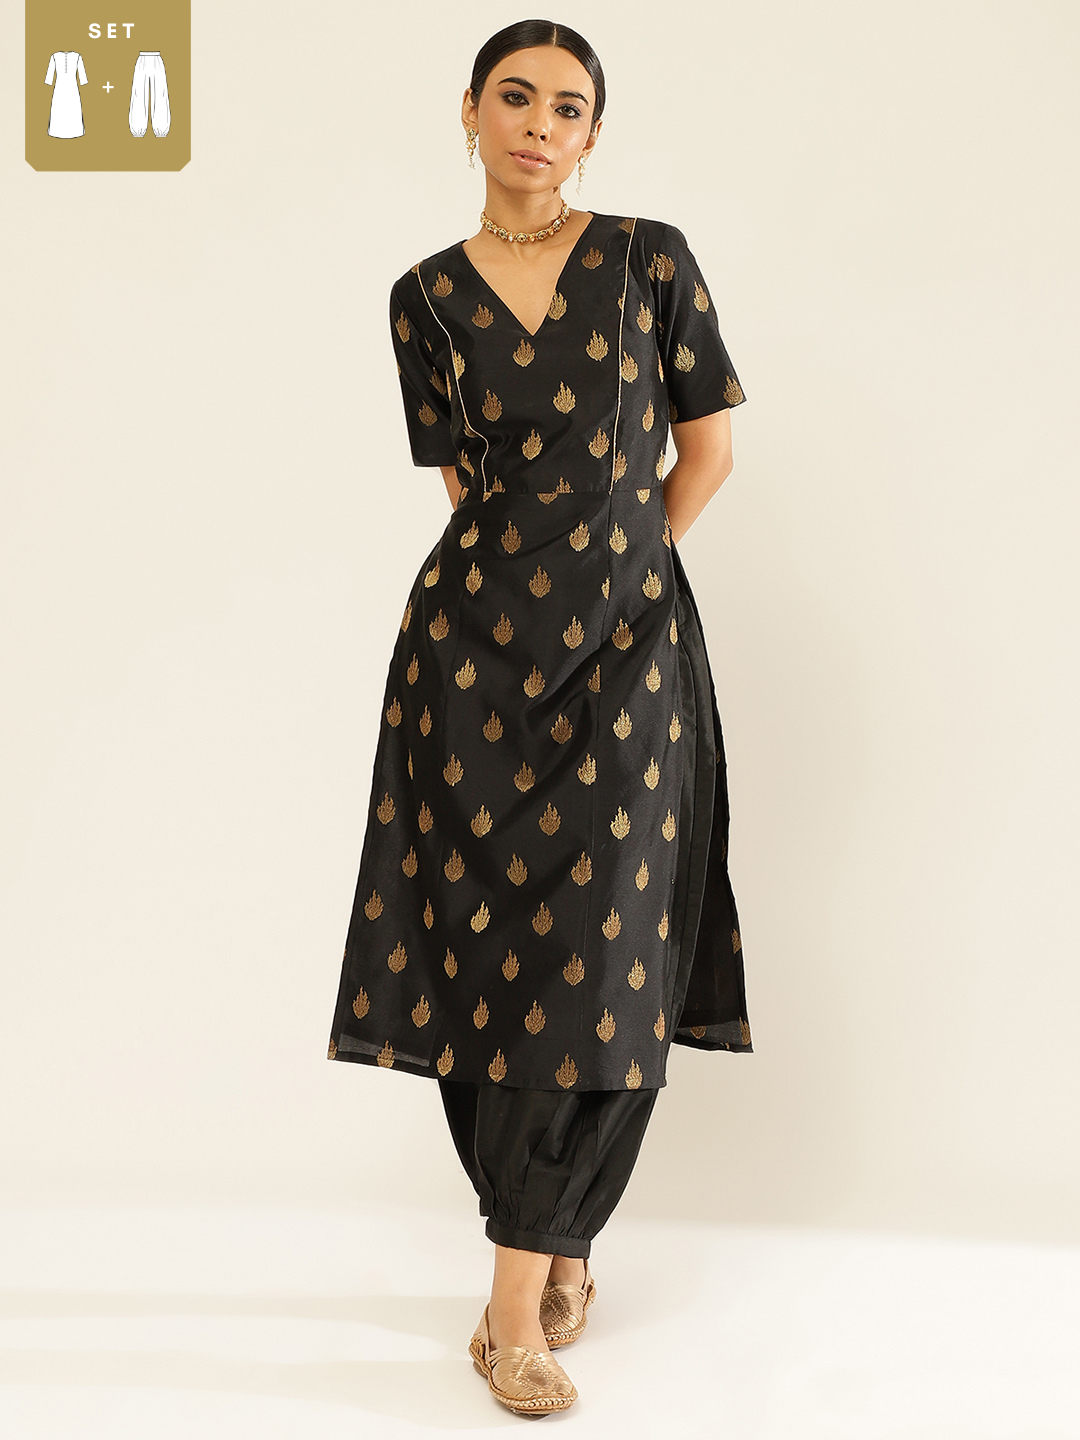 Zari Tafetta Kurta with contrasting details paired with pathani pants